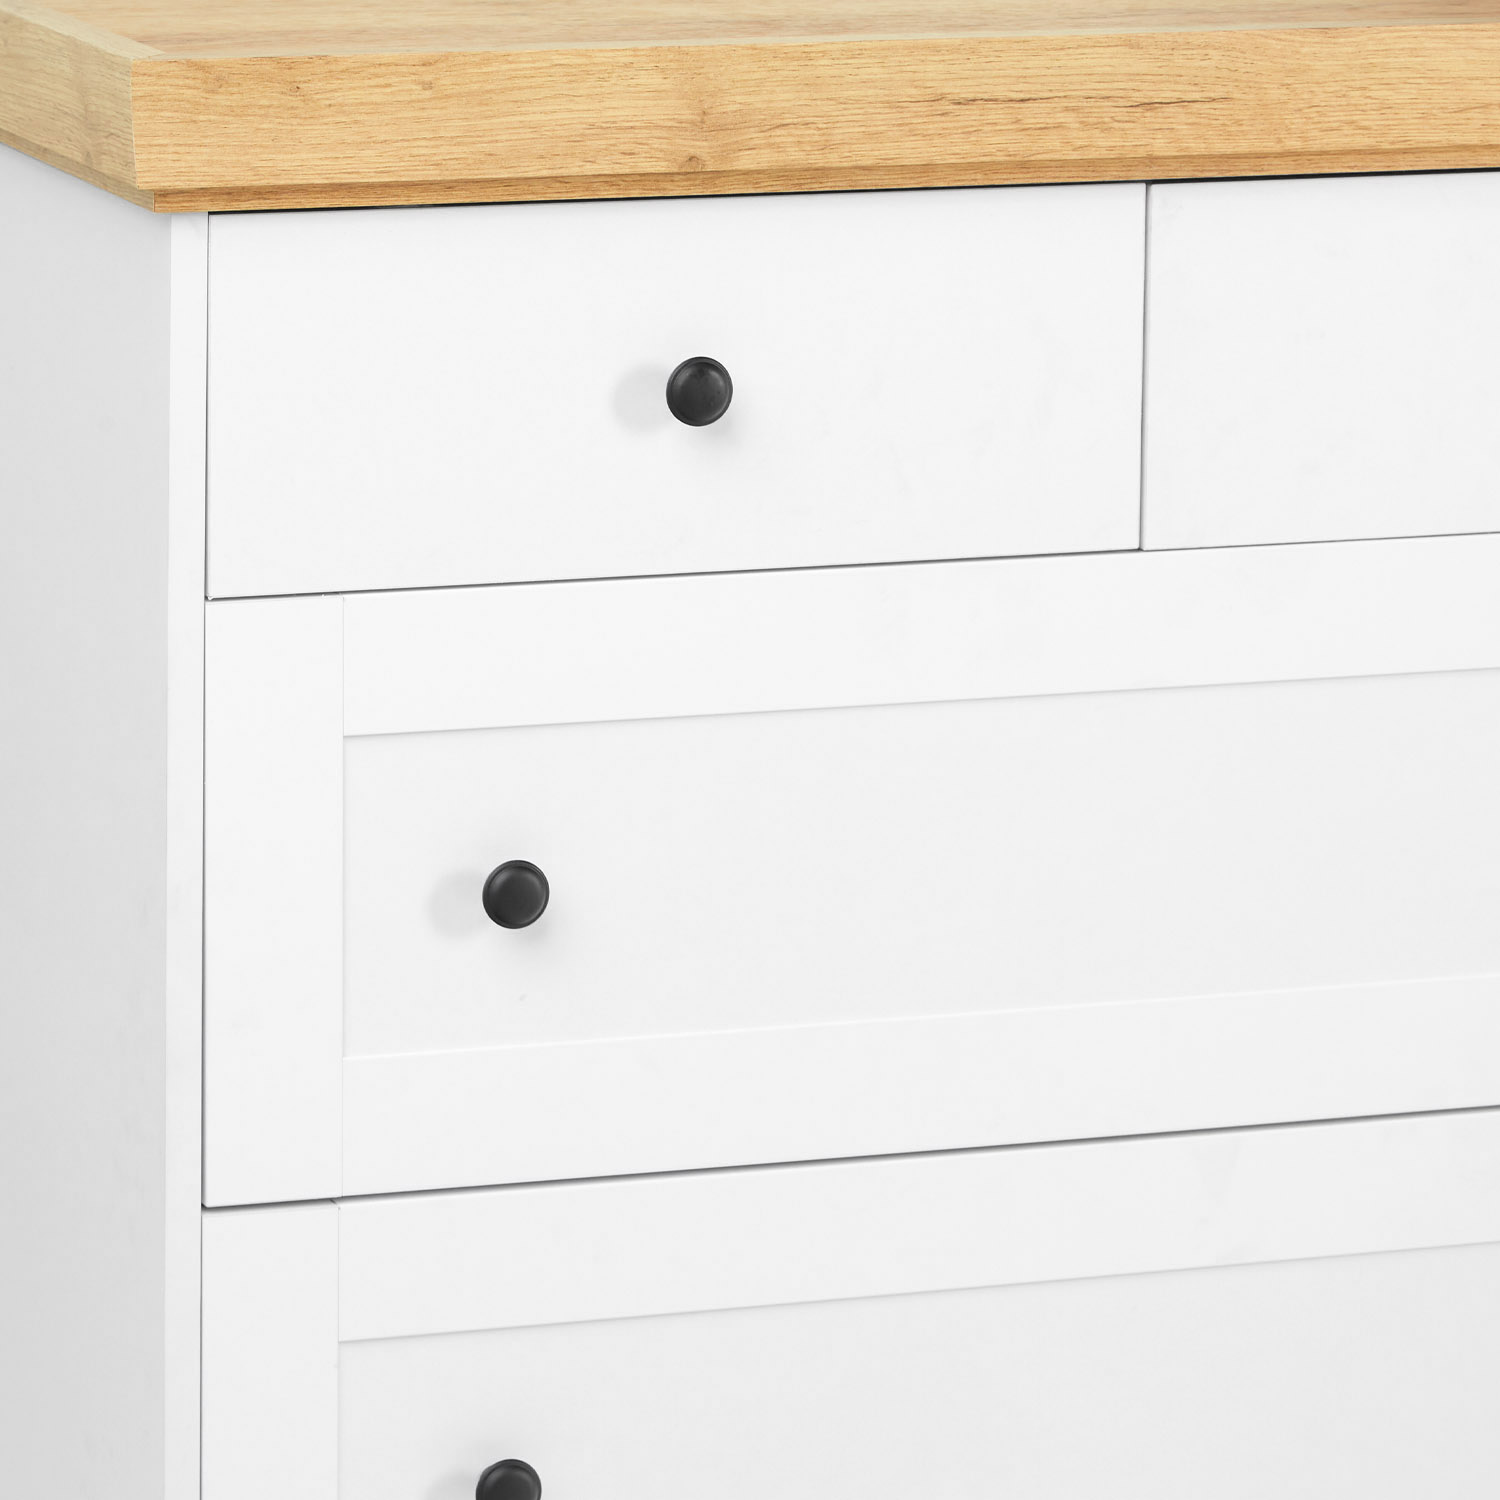 Chest of Drawers Sideboard Oak Matt White Wood Solid Cupboard with 4 Drawers